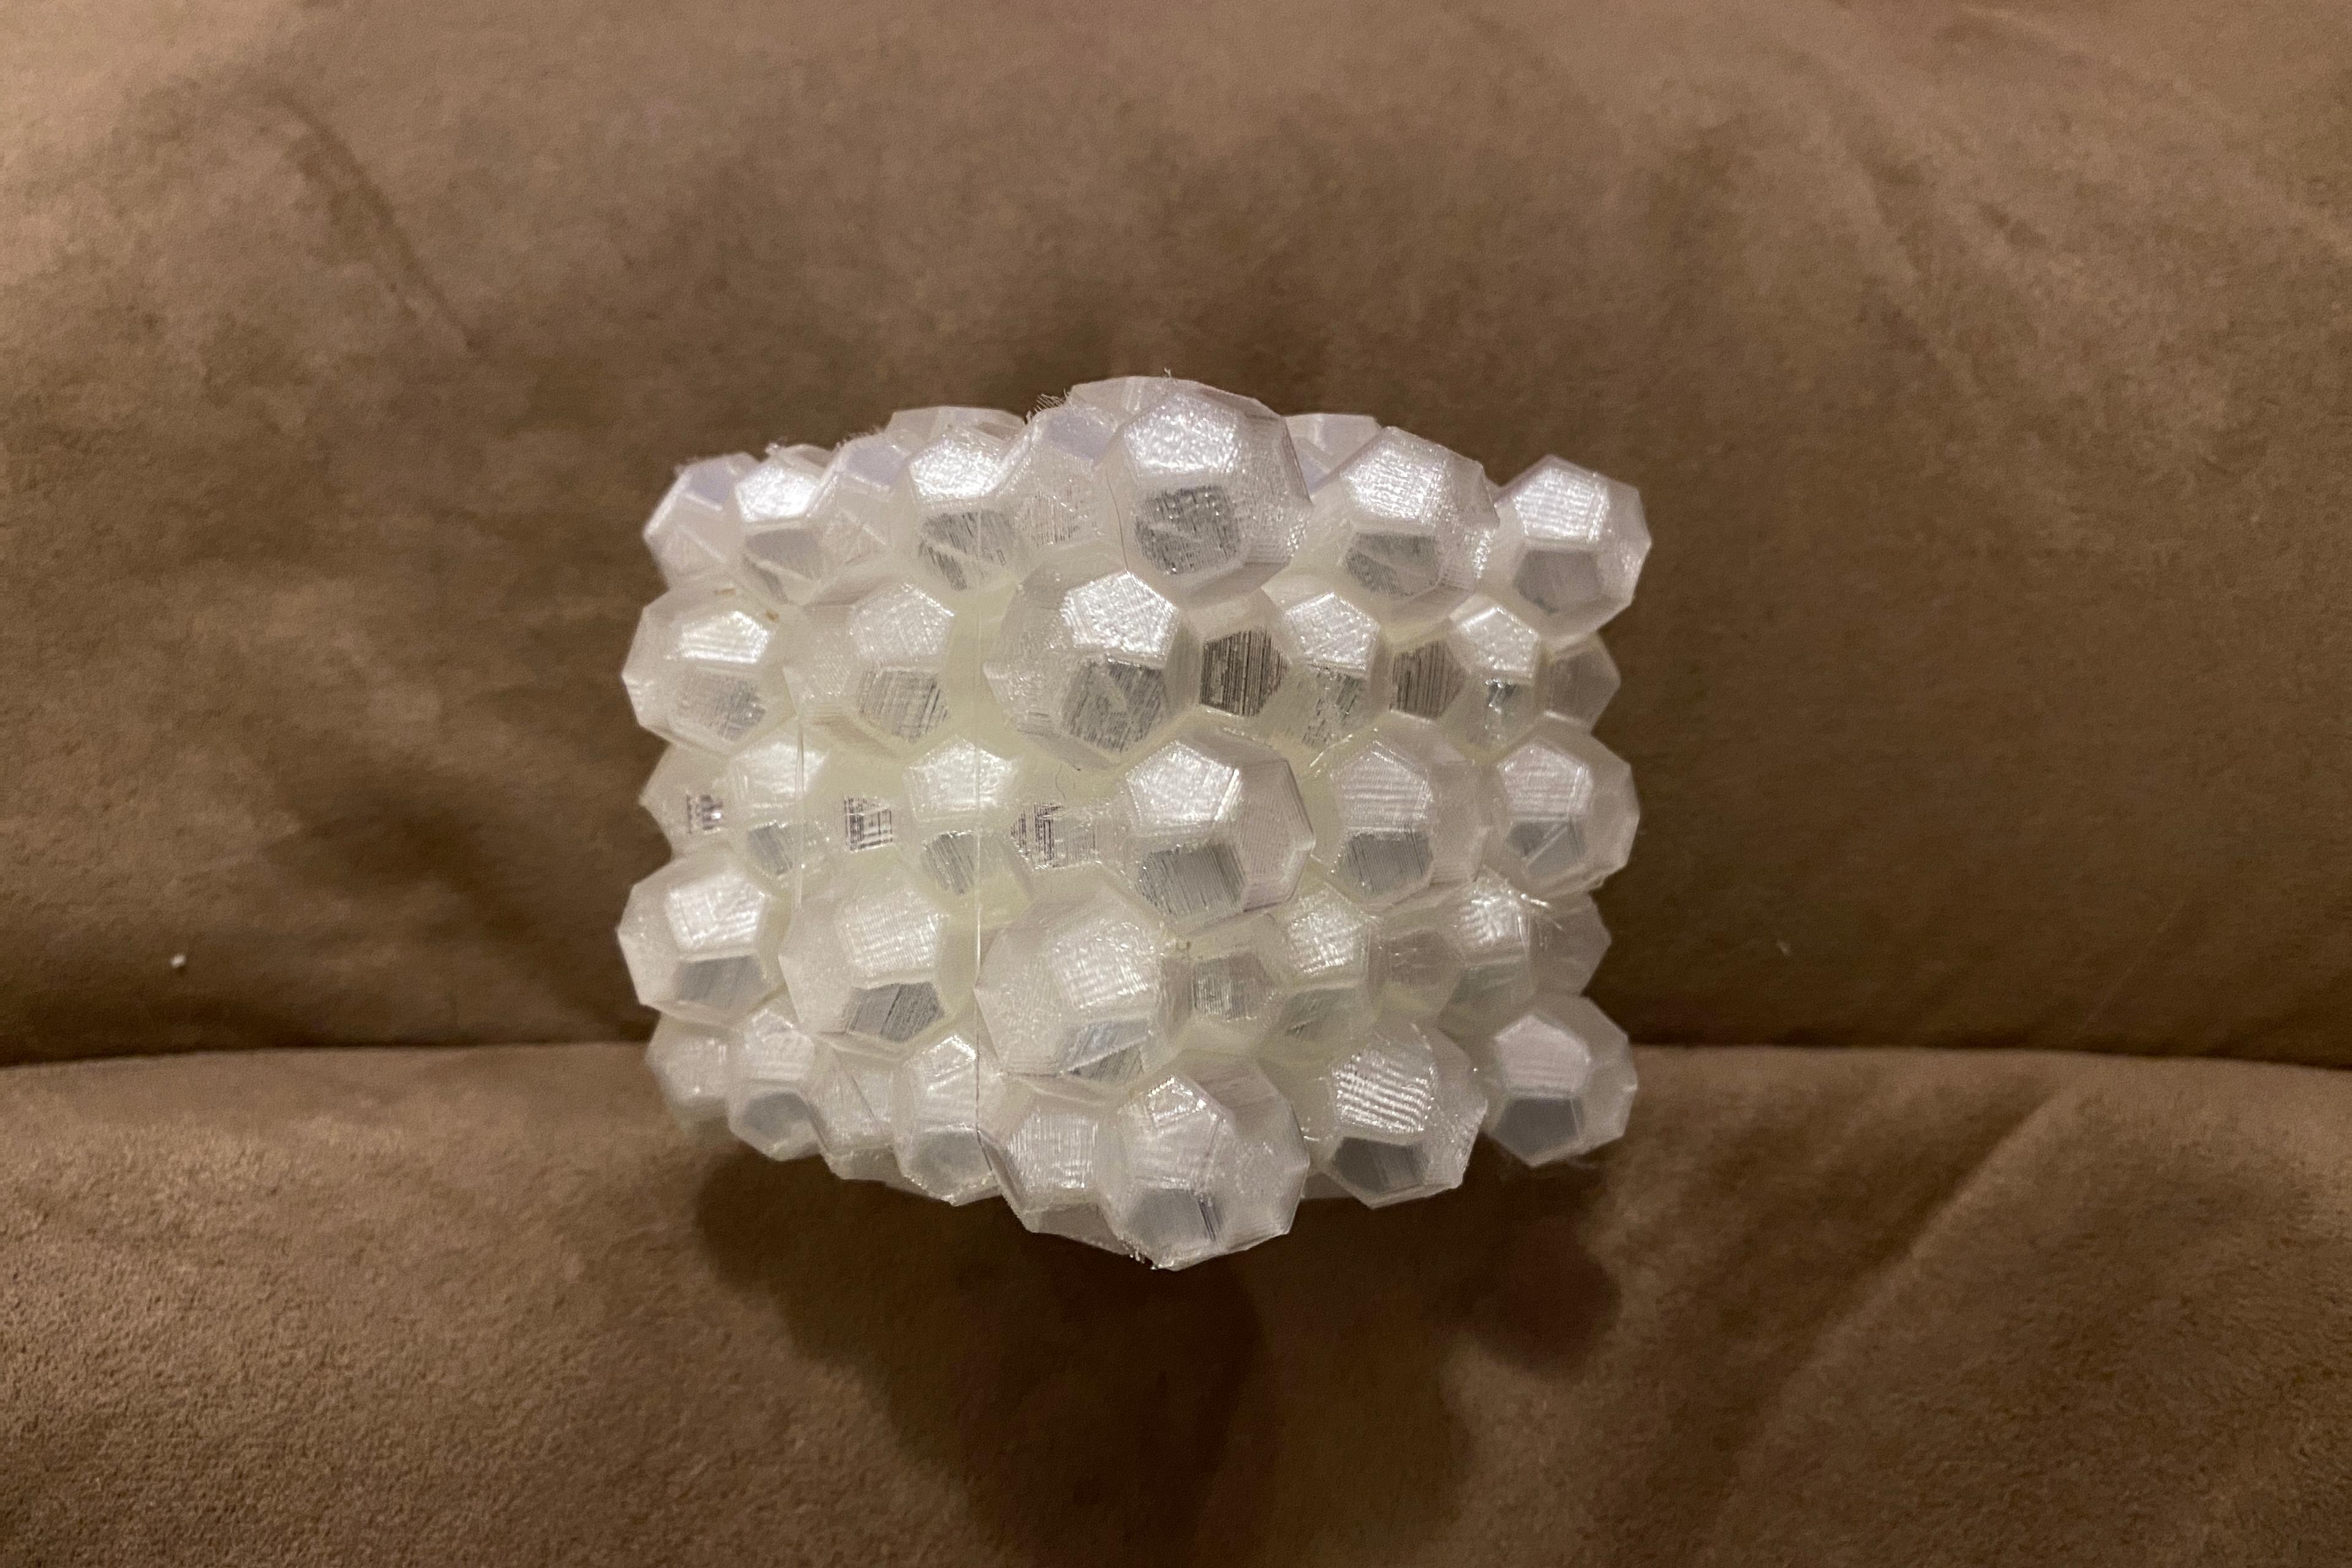 Weaire-Phelan Tetrastix - Printed with soft pla clear no in fill so the light can’t reflect out. It Looks like crystals. - 3d model